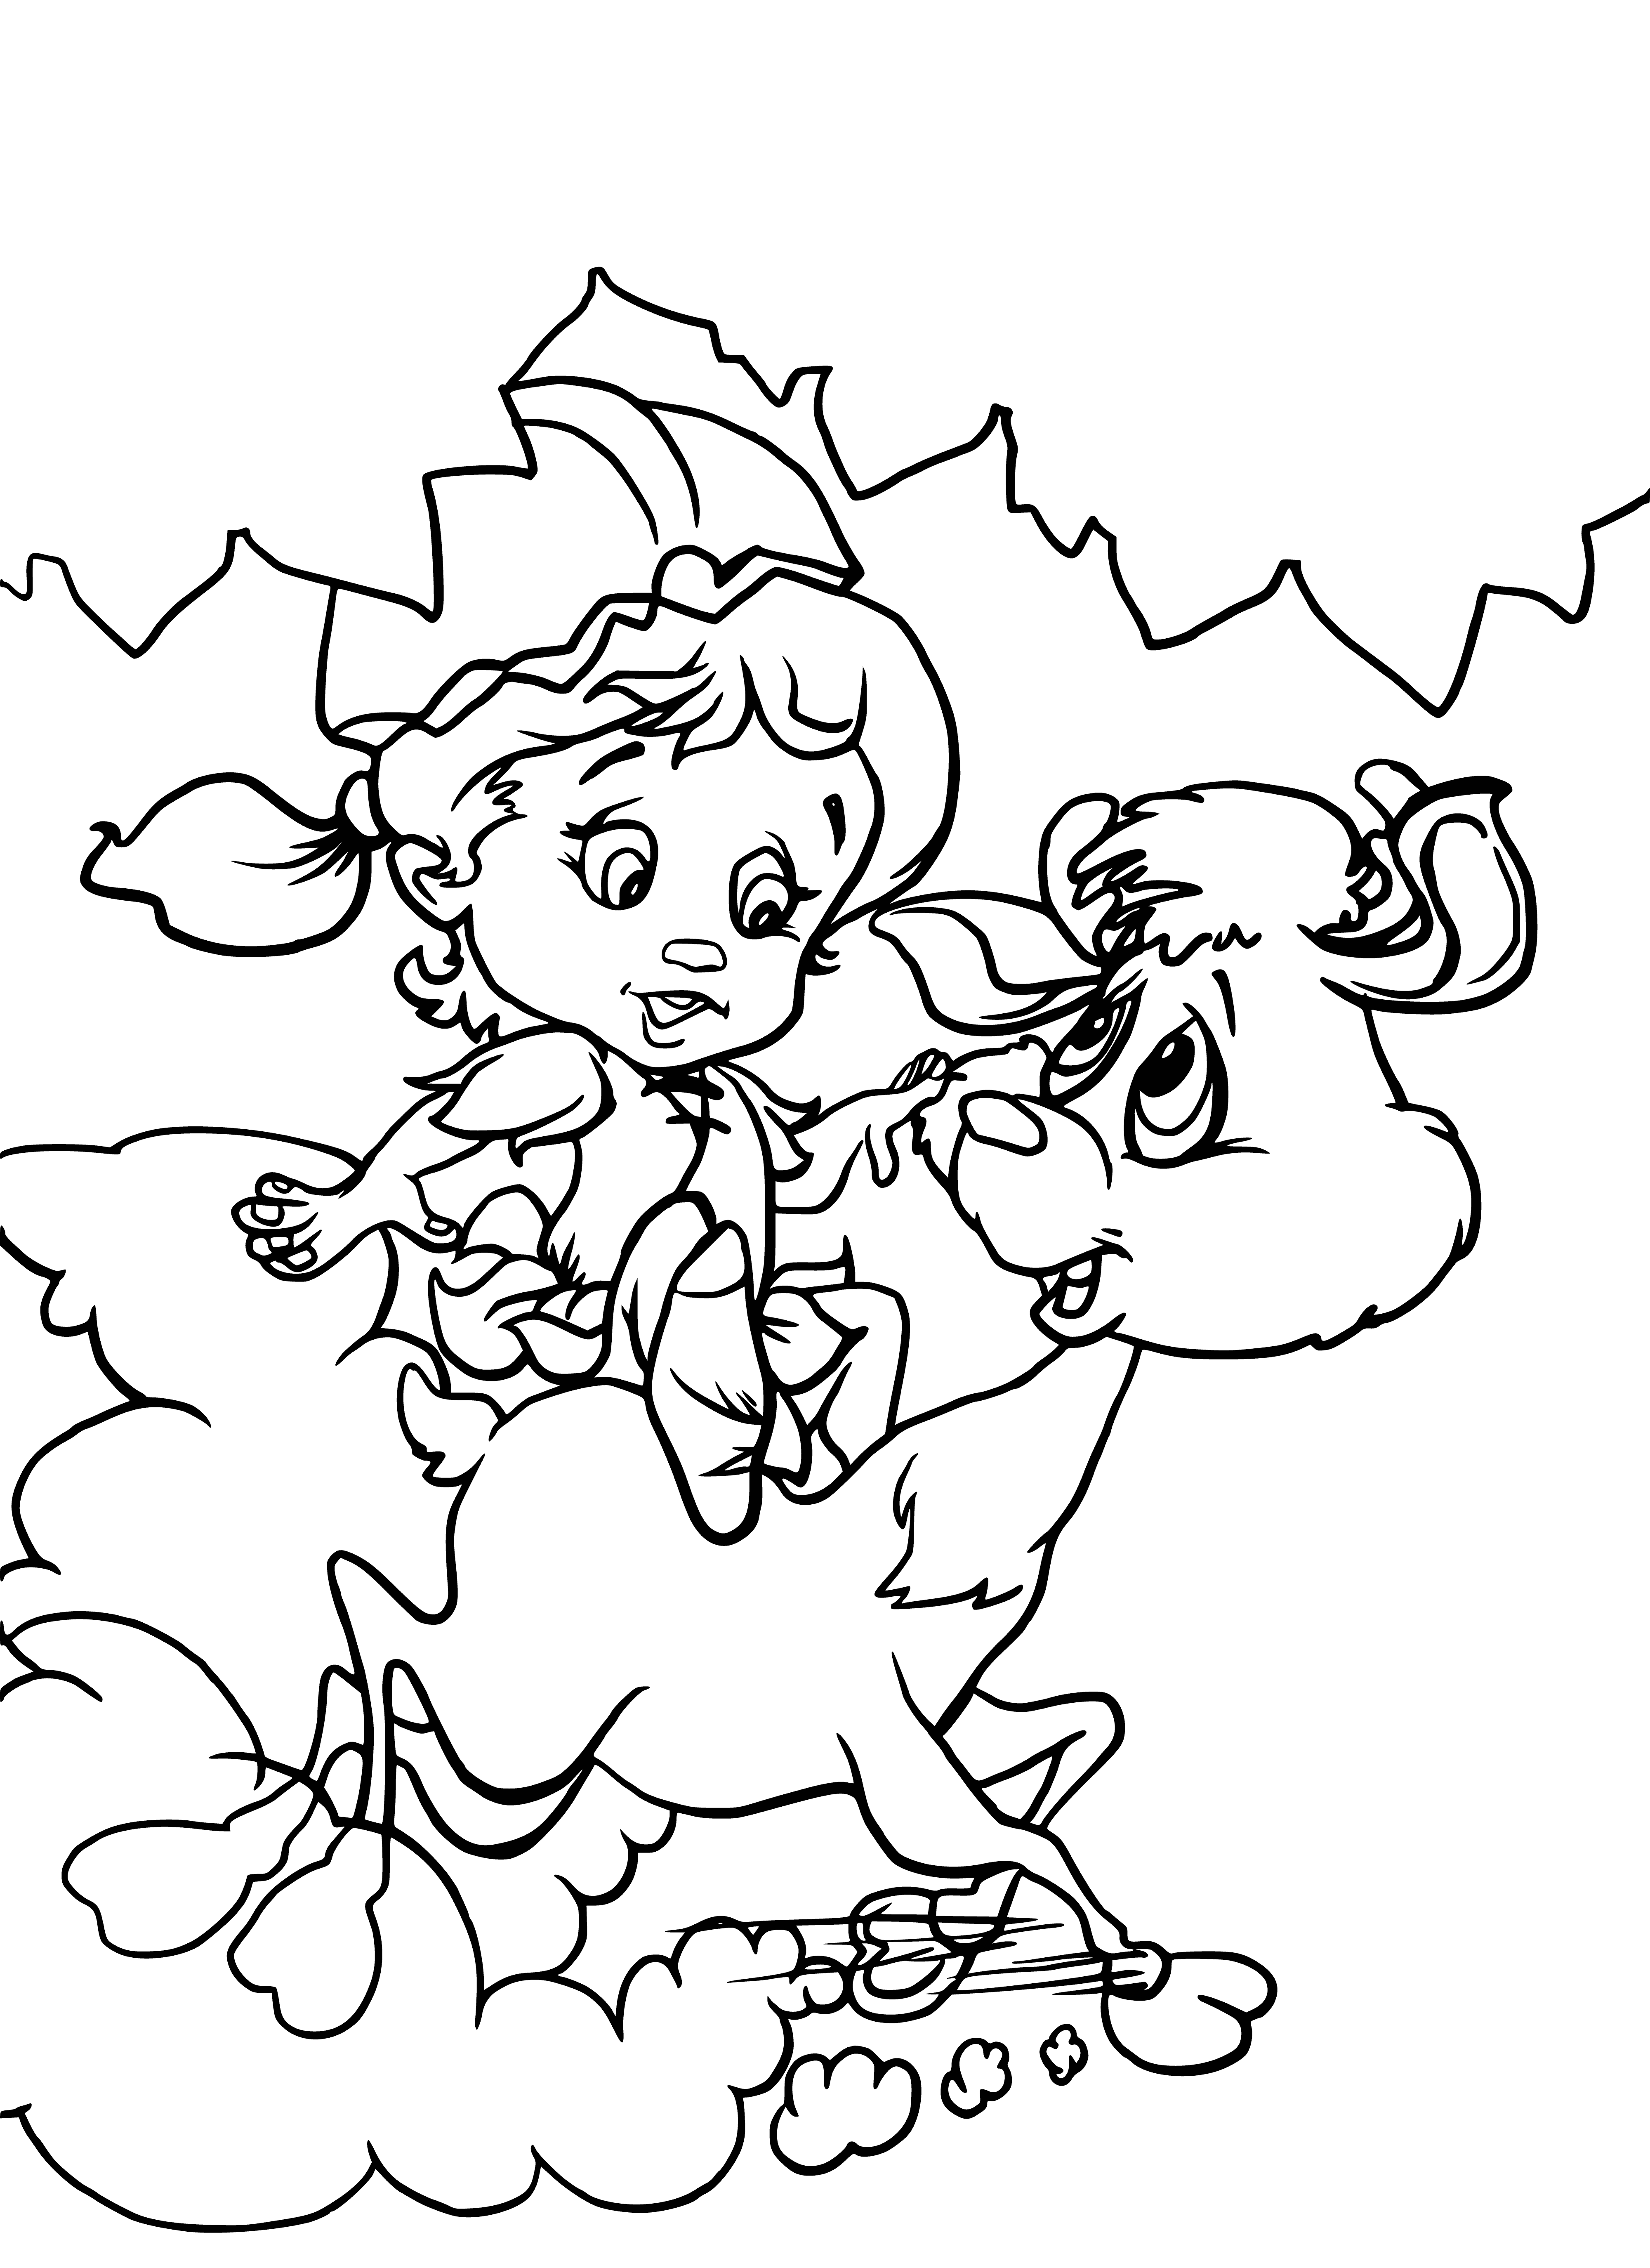 coloring page: Oreshenka and her friends are a blur of speed. But no matter how fast they are, they stay together and look out for each other.